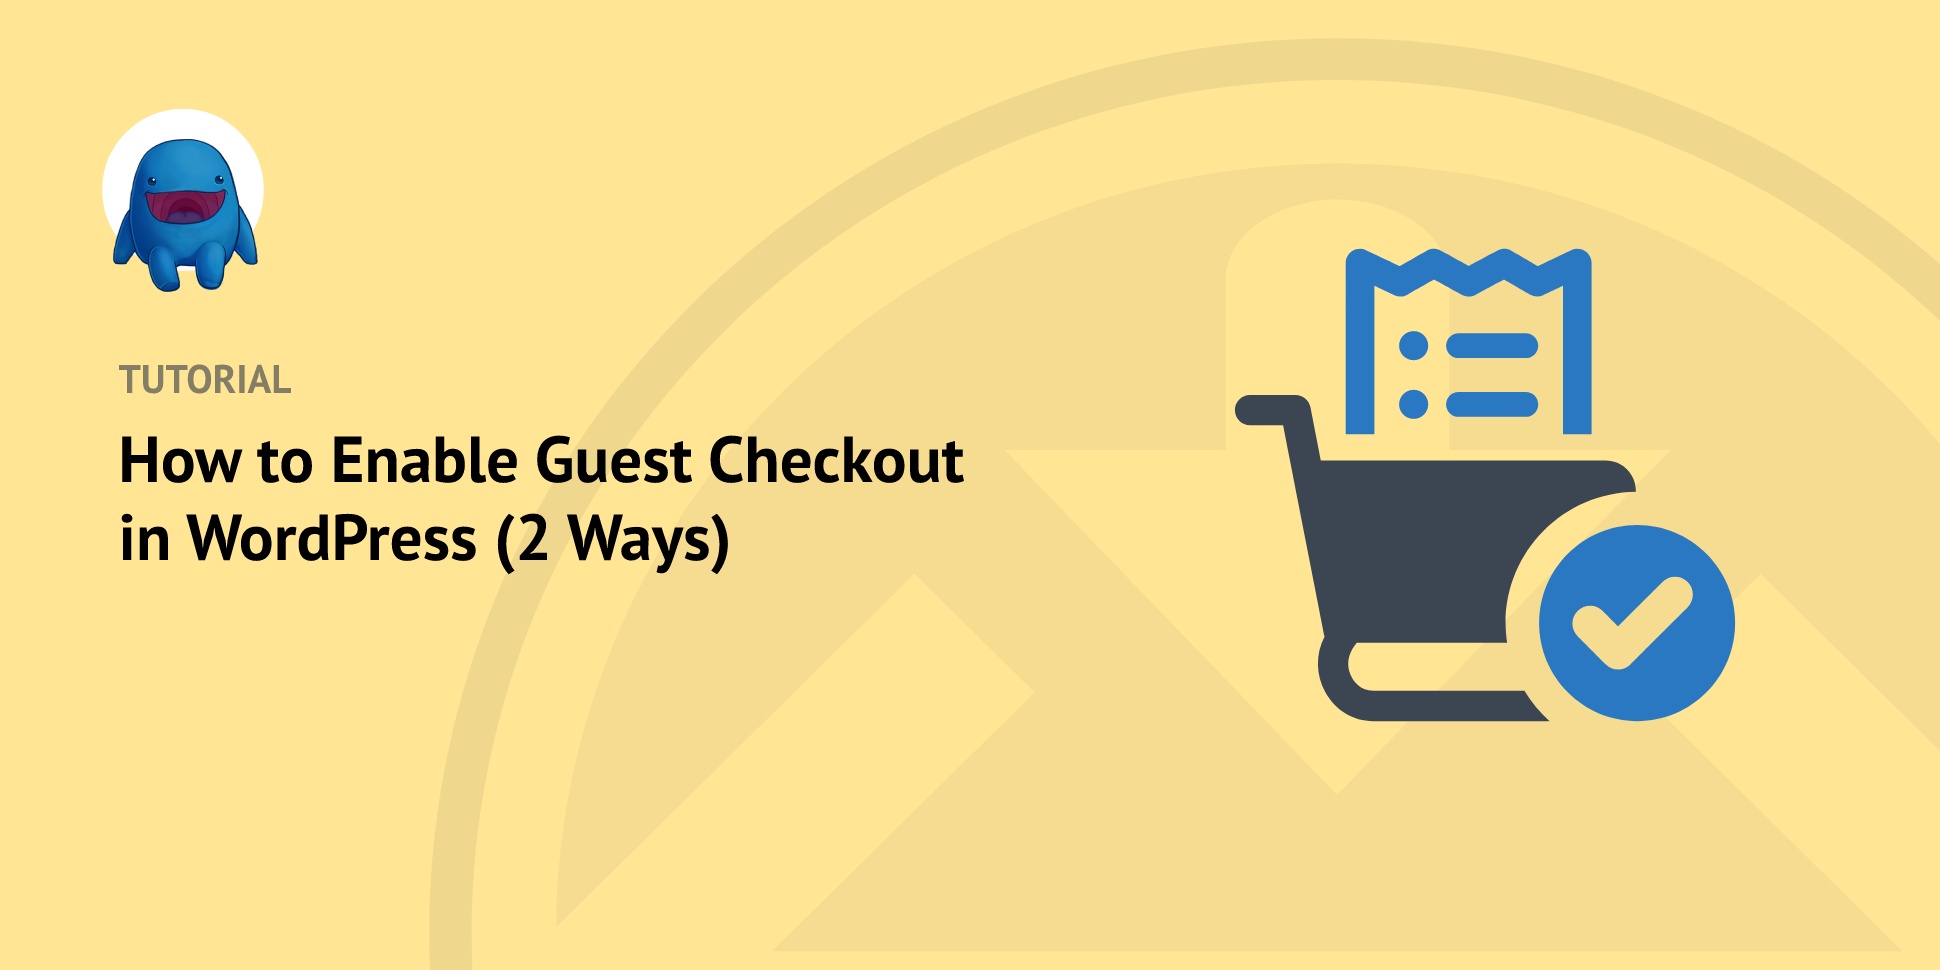 How to Enable Guest Checkout in WordPress